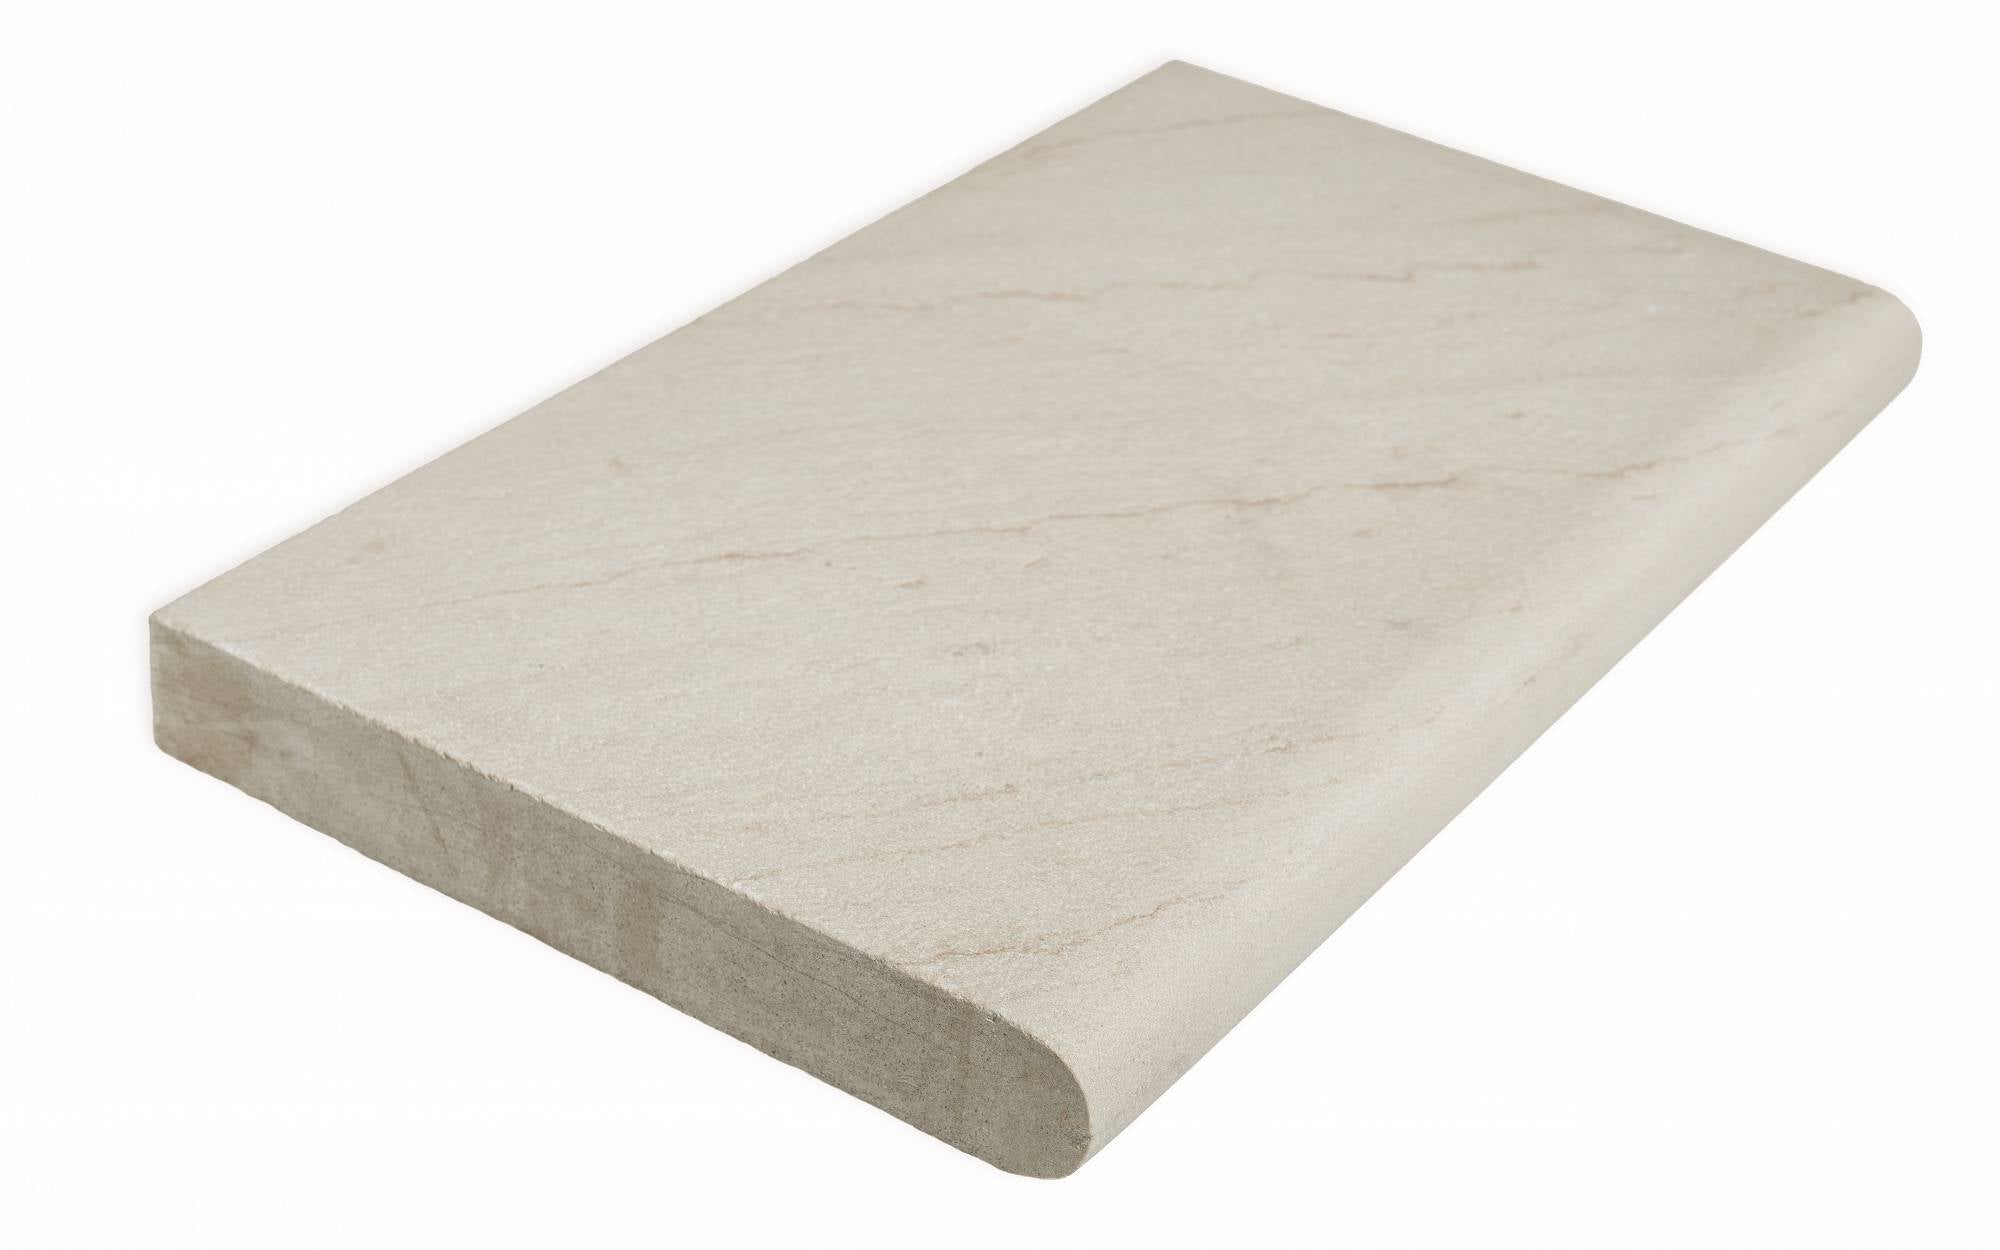 yorkshire old world flagstone signature paver bullnose molding 14 by 24 by 2 inch exterior applications manufactured by f and m supply distributed by surface group